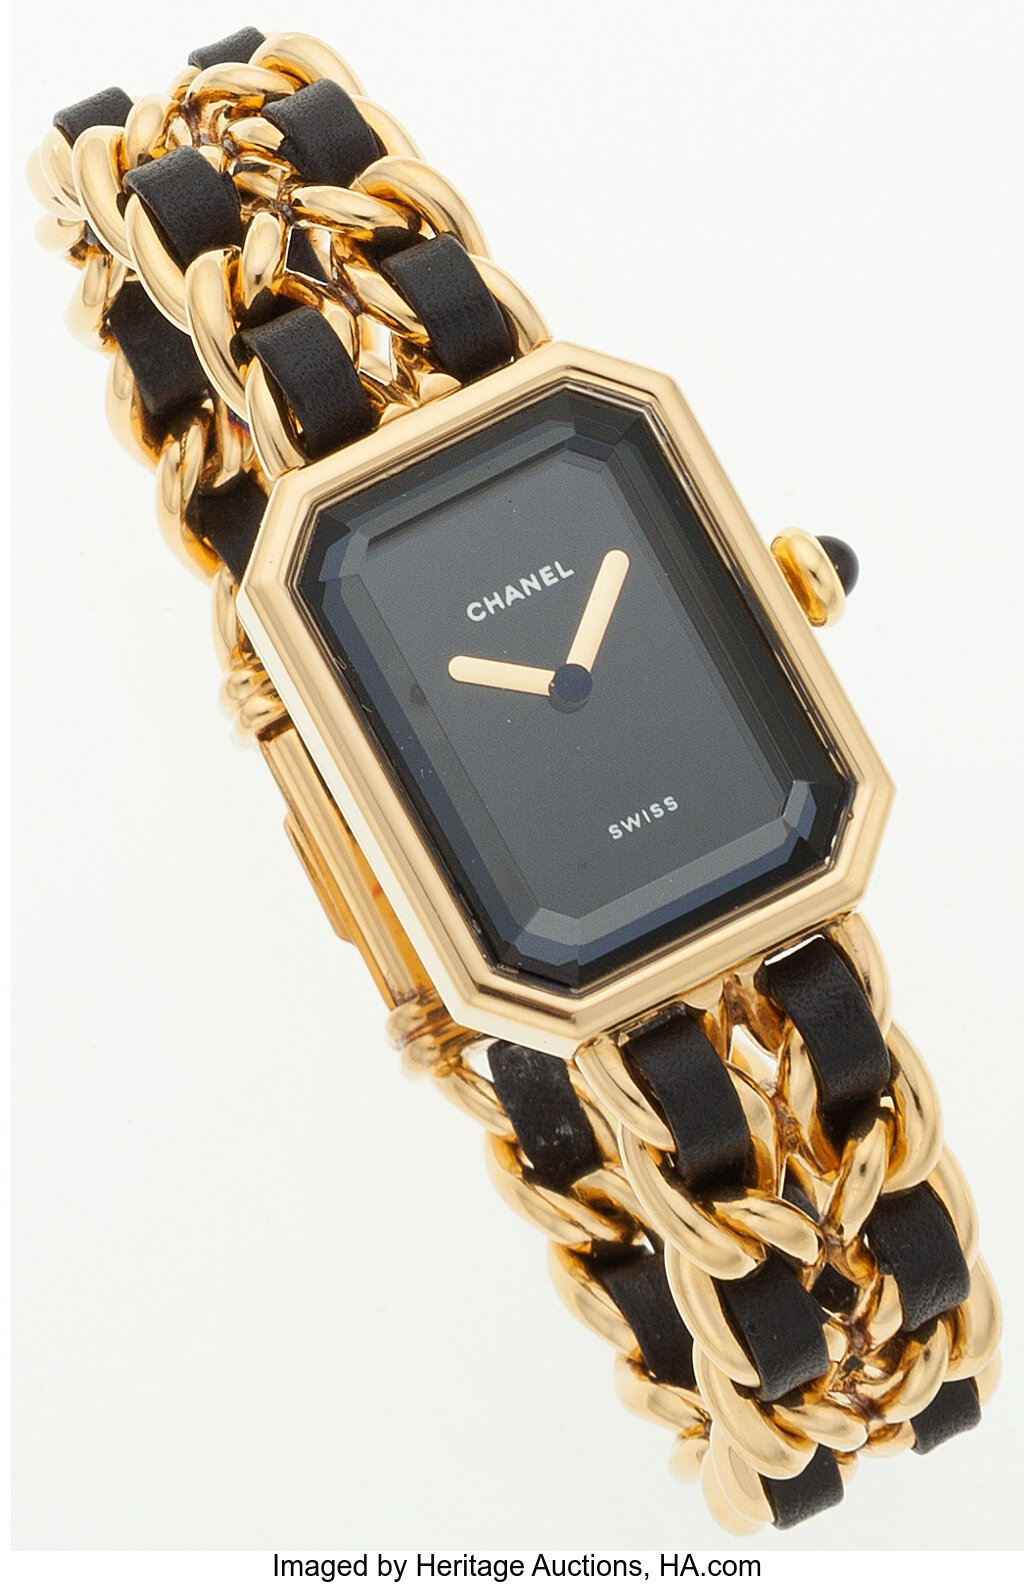 Chanel Premiere 18k Gold Plated Watch with Black Details. , Lot #78015